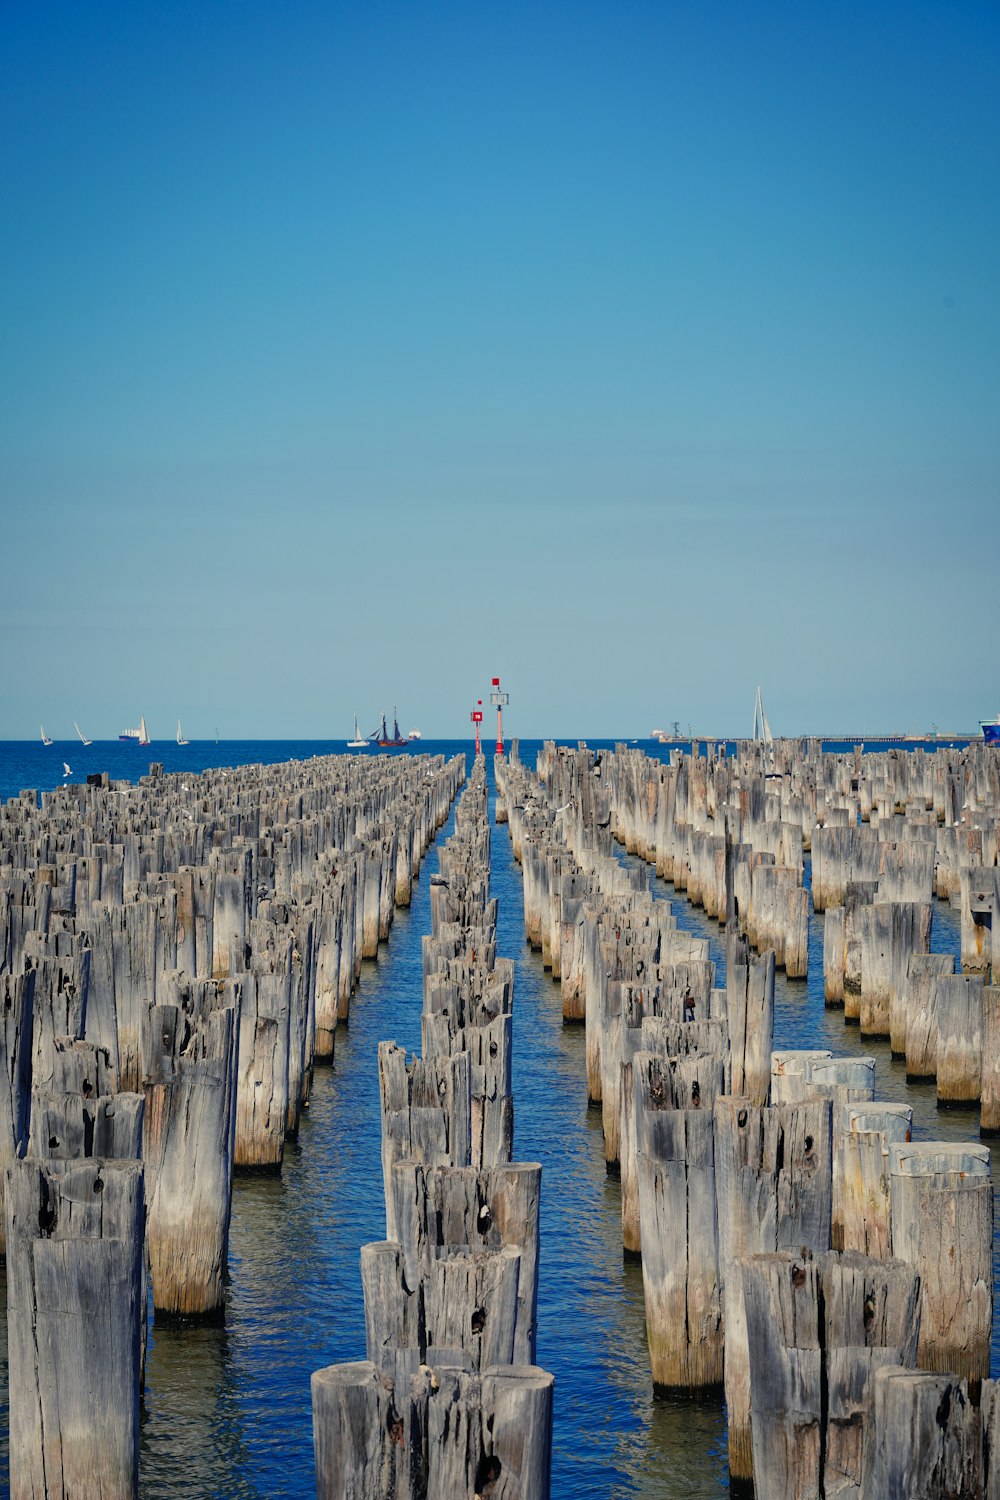 a large body of water surrounded by wooden posts